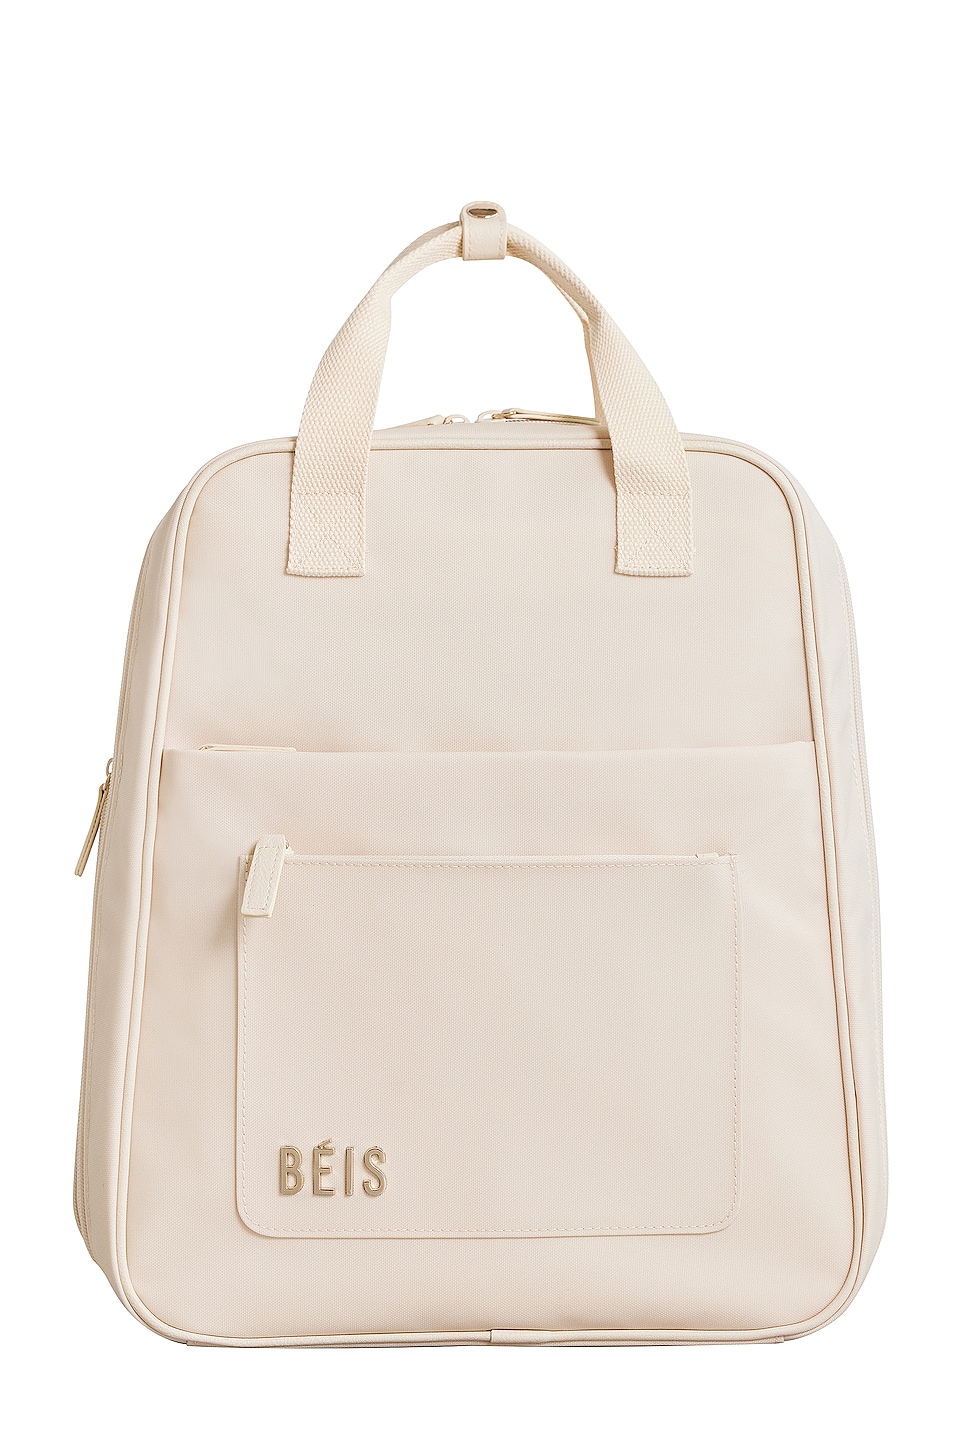 BEIS The Expandable Backpack in Beige | REVOLVE